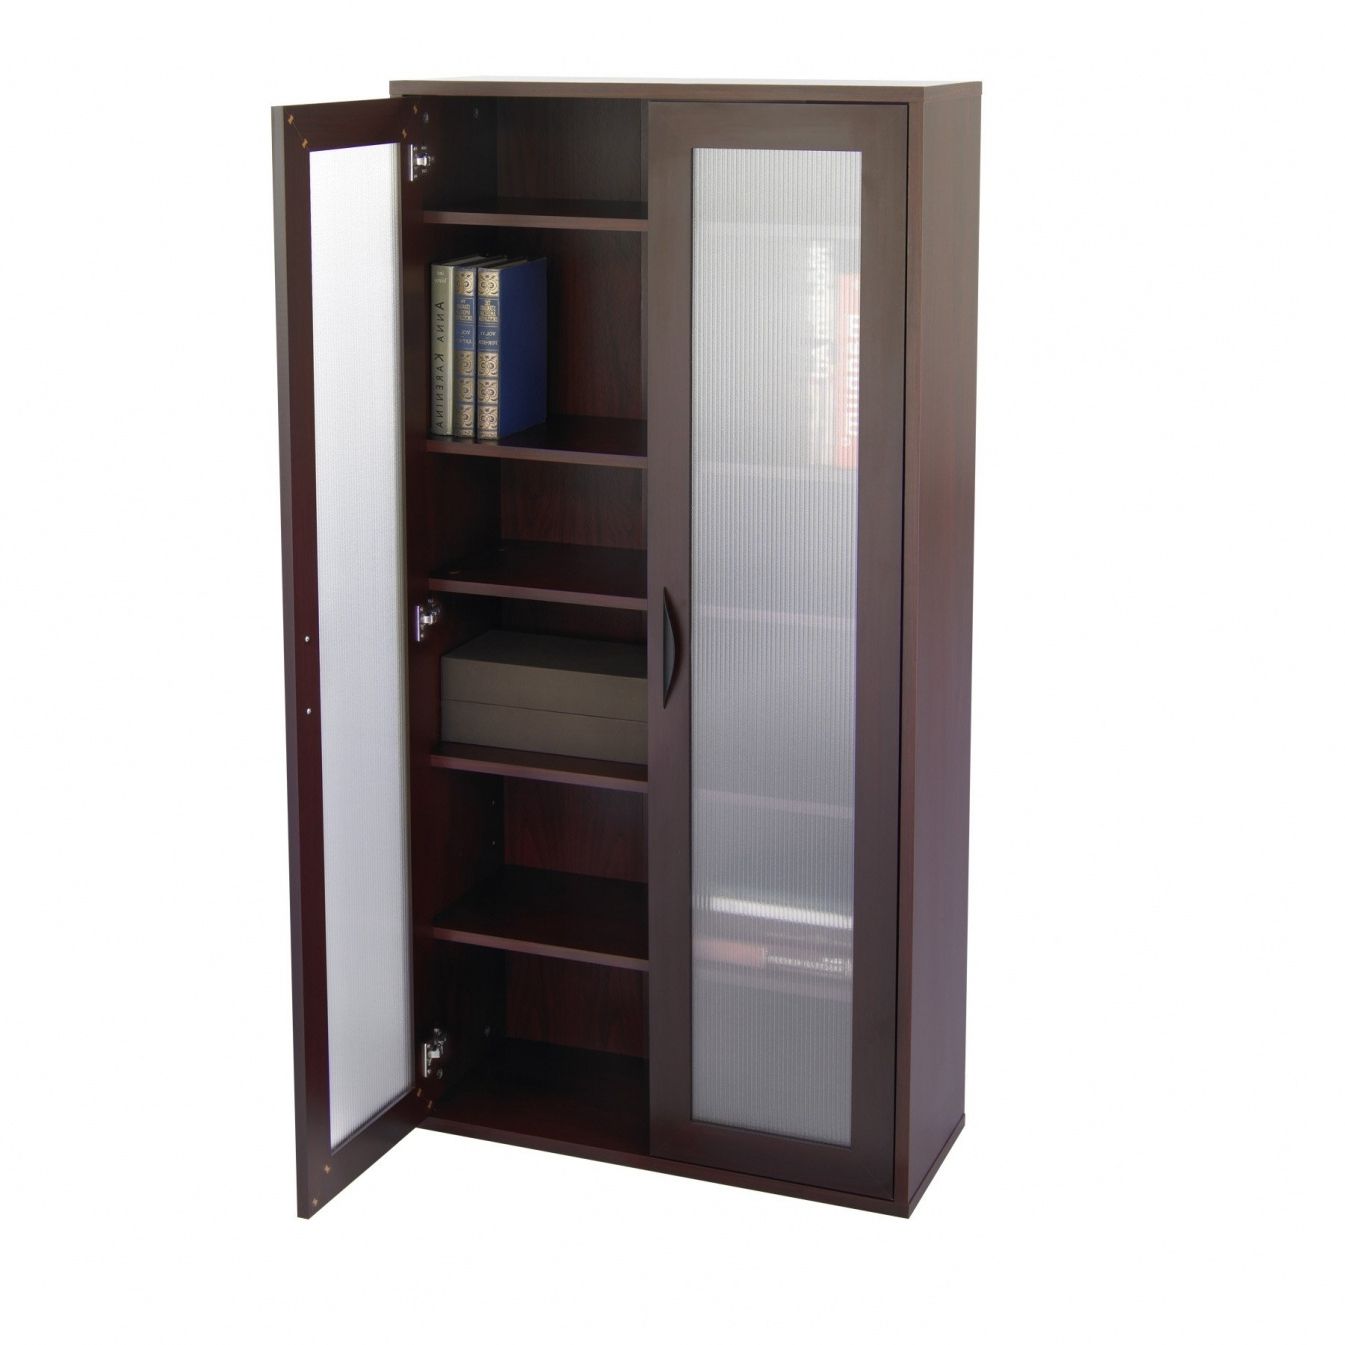 Glass Door Bookcases With Famous Mahogany Bookcase With Glass Doors – Home Office Furniture Set (View 9 of 15)